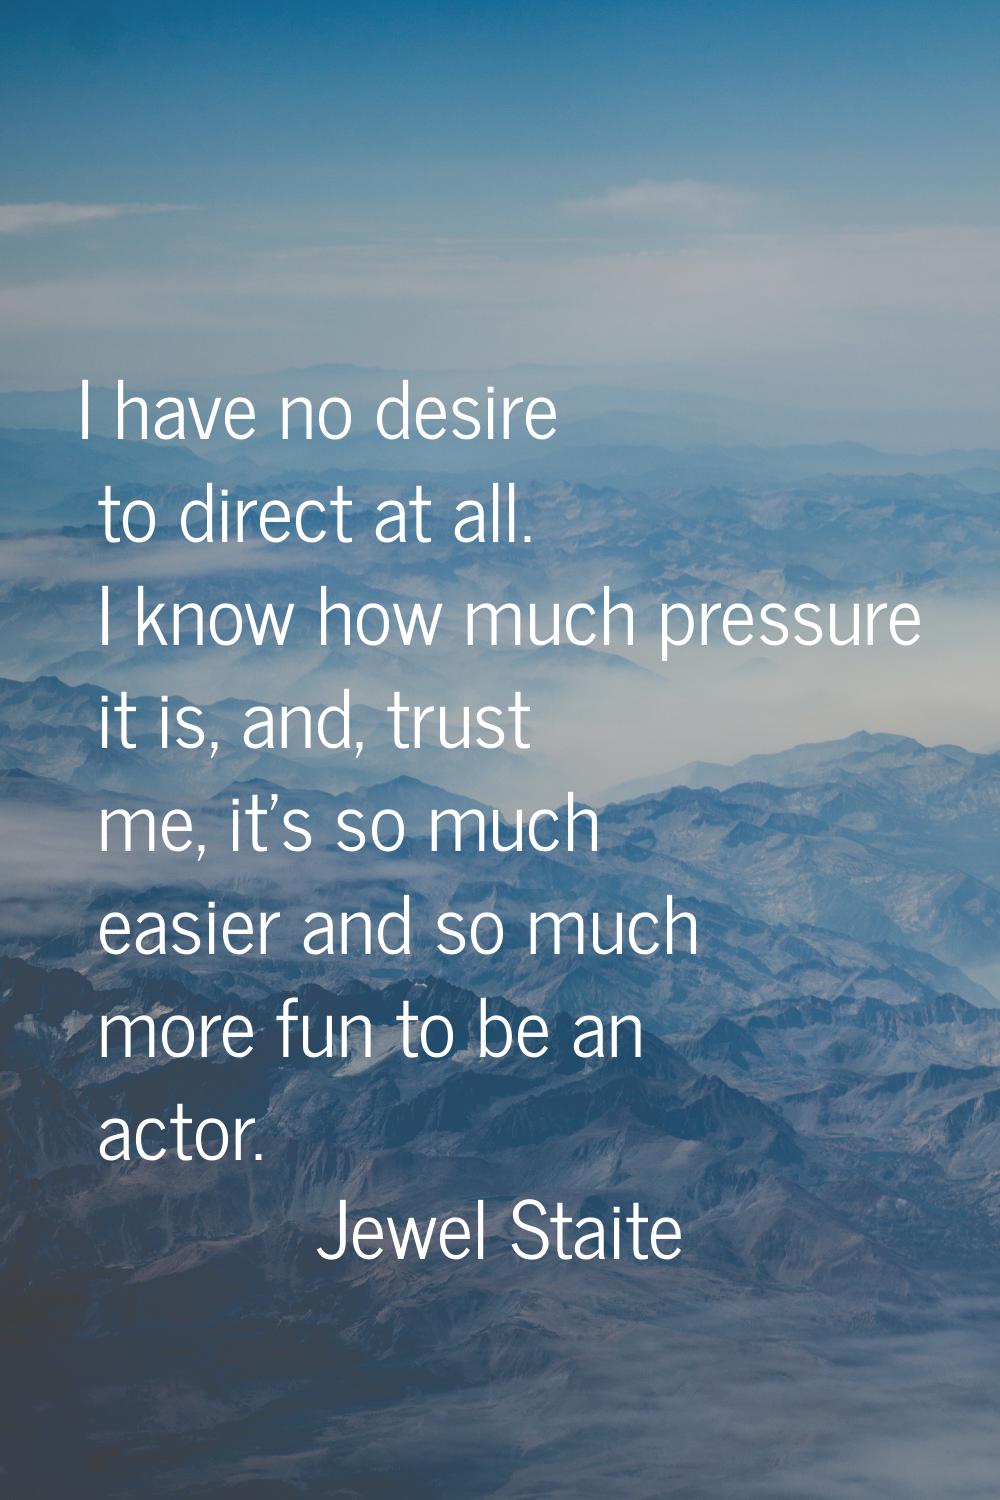 I have no desire to direct at all. I know how much pressure it is, and, trust me, it's so much easi